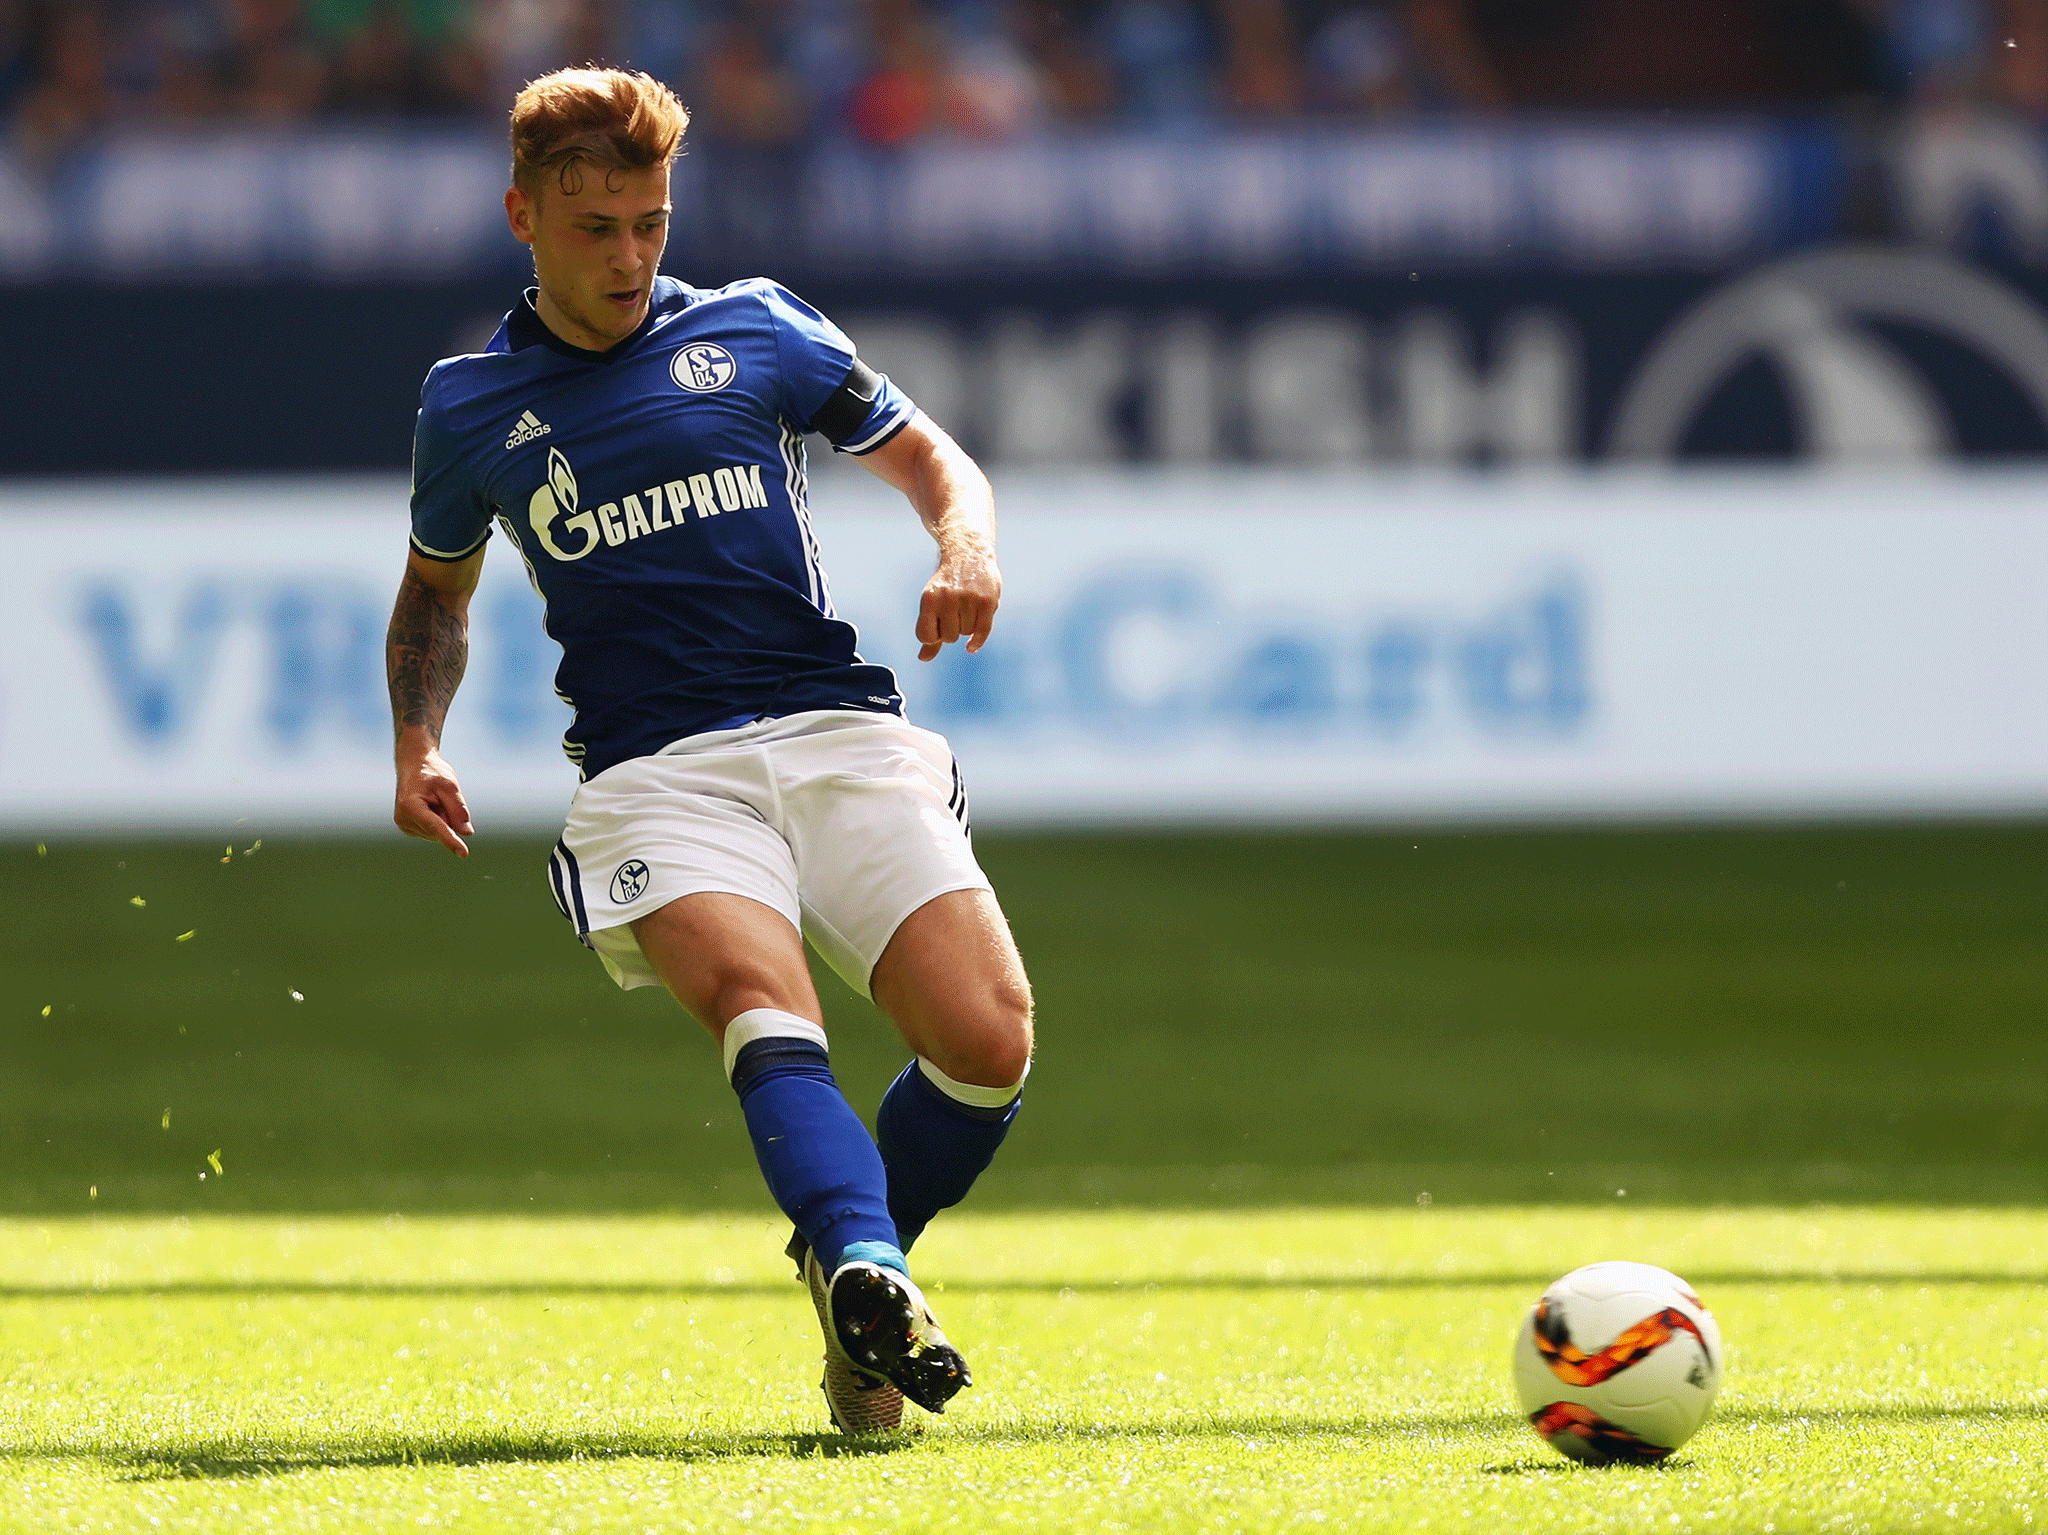 The 20-year-old is one of the Bundesliga's rising stars